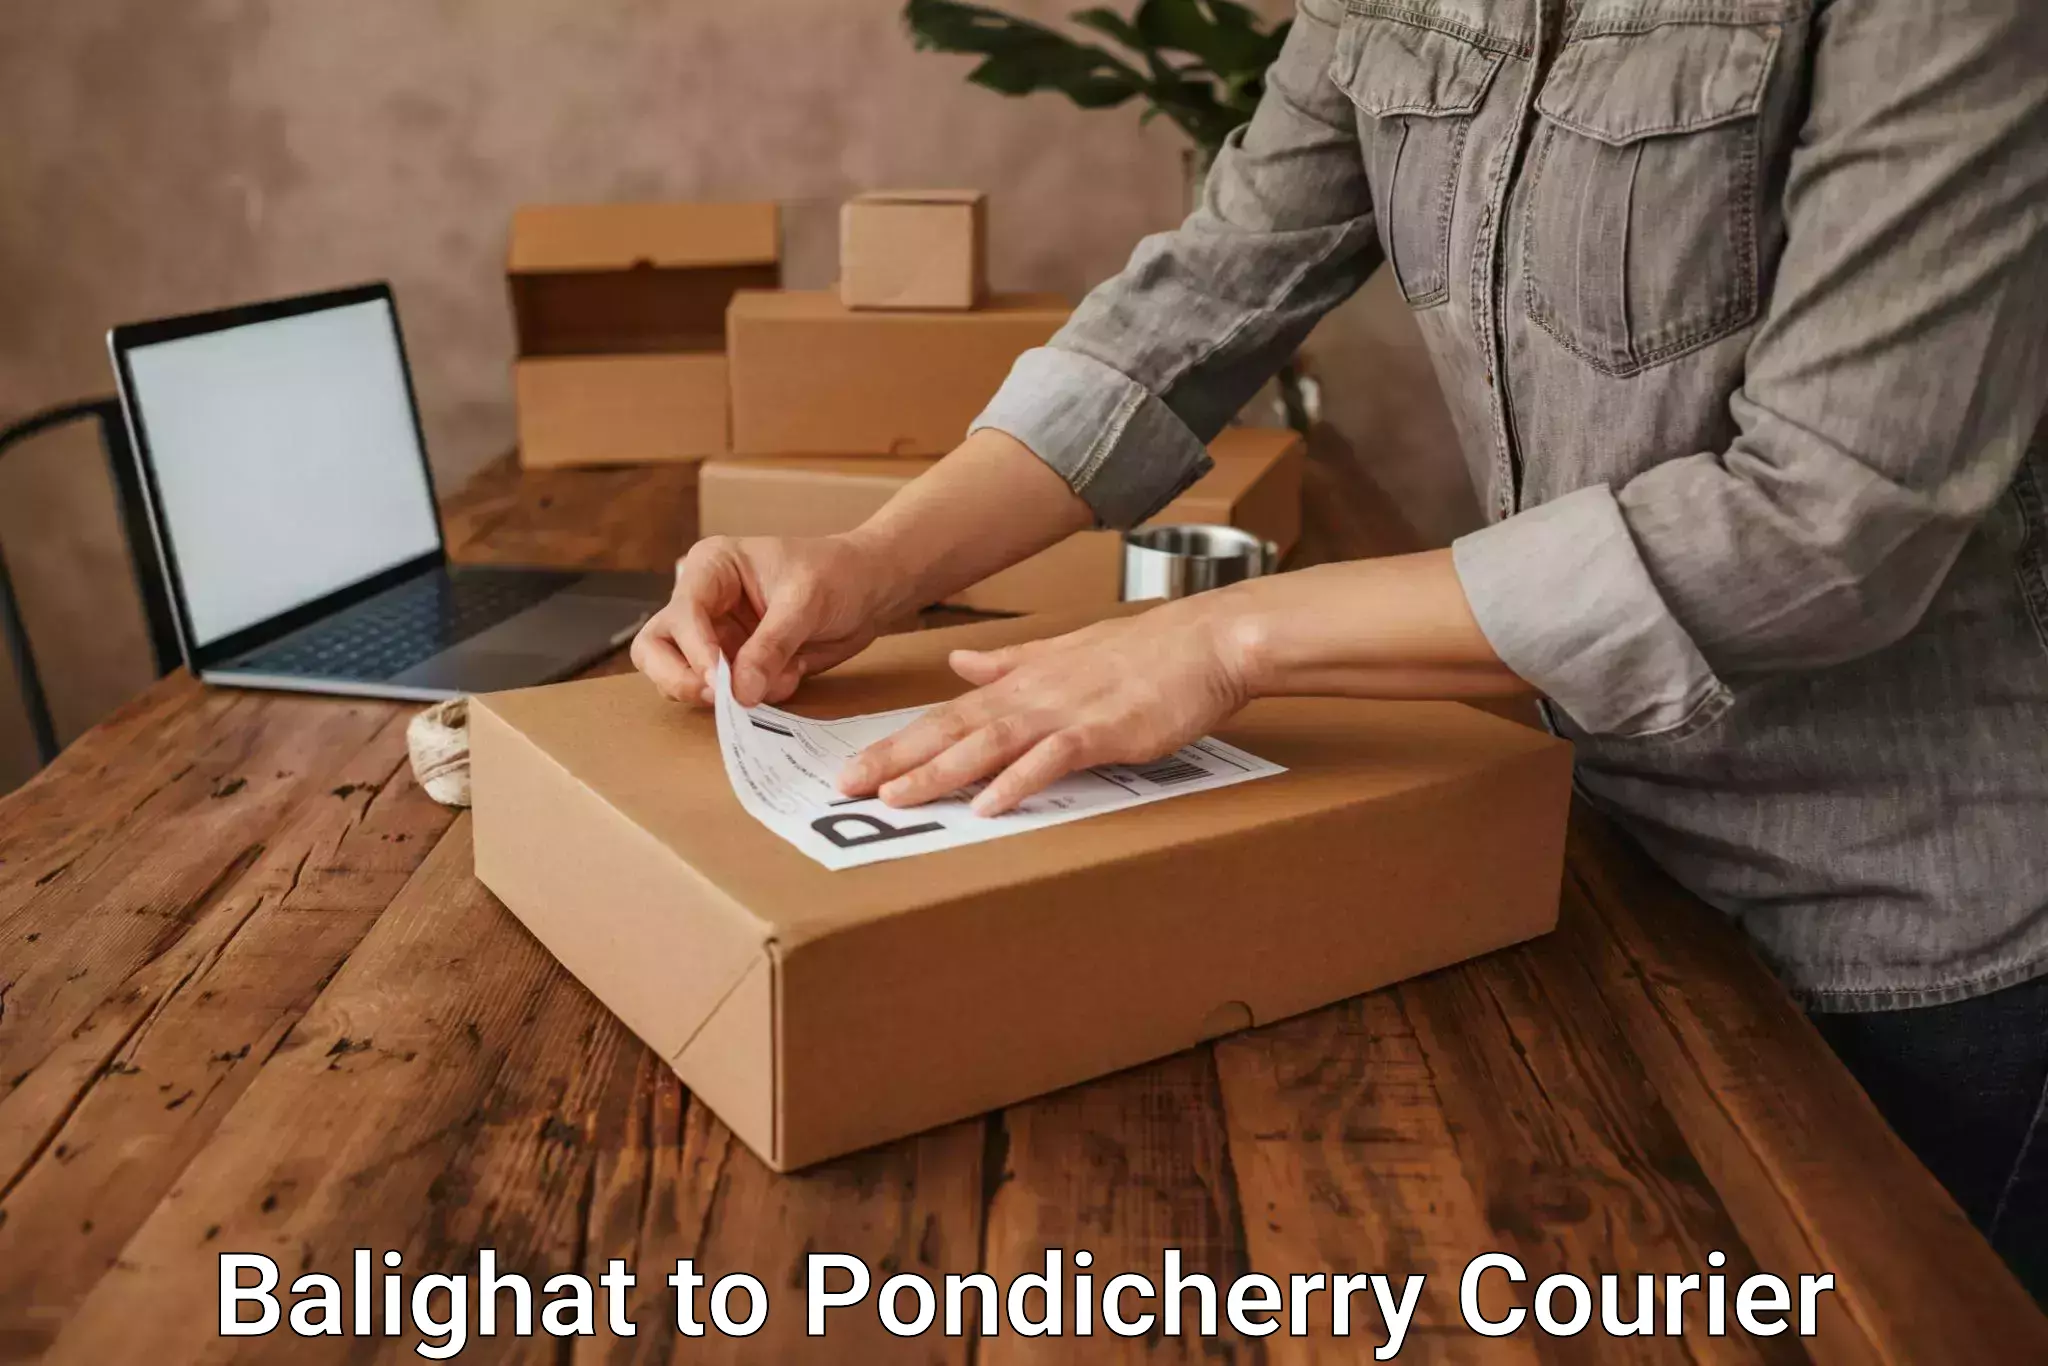 Subscription-based courier Balighat to Pondicherry